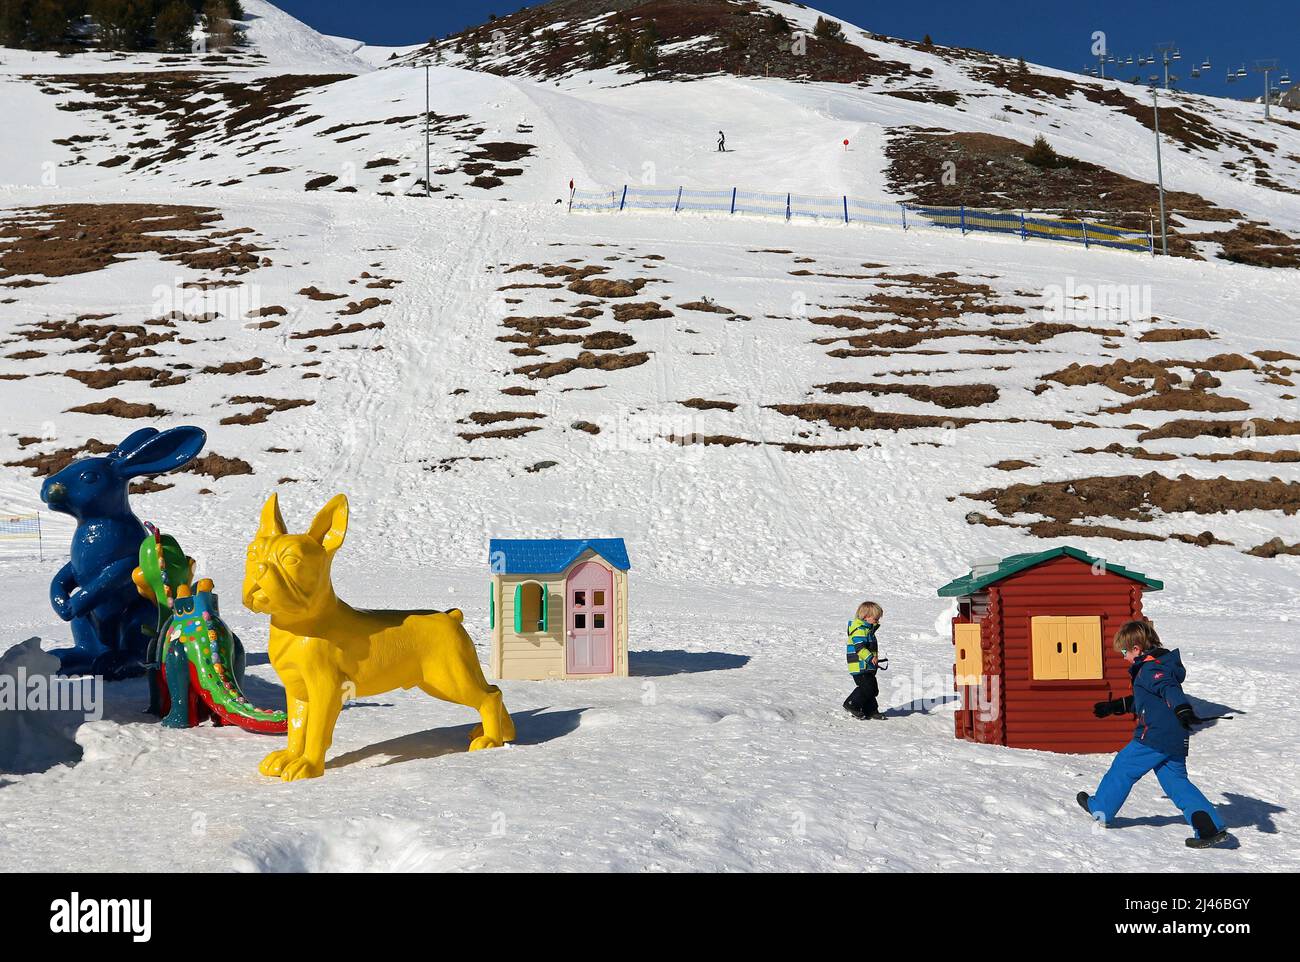 The children's colourful play area in the ski resort of Kühtai, Austrian Alps, near Innsbruck; skiers on the slopes in the background Stock Photo